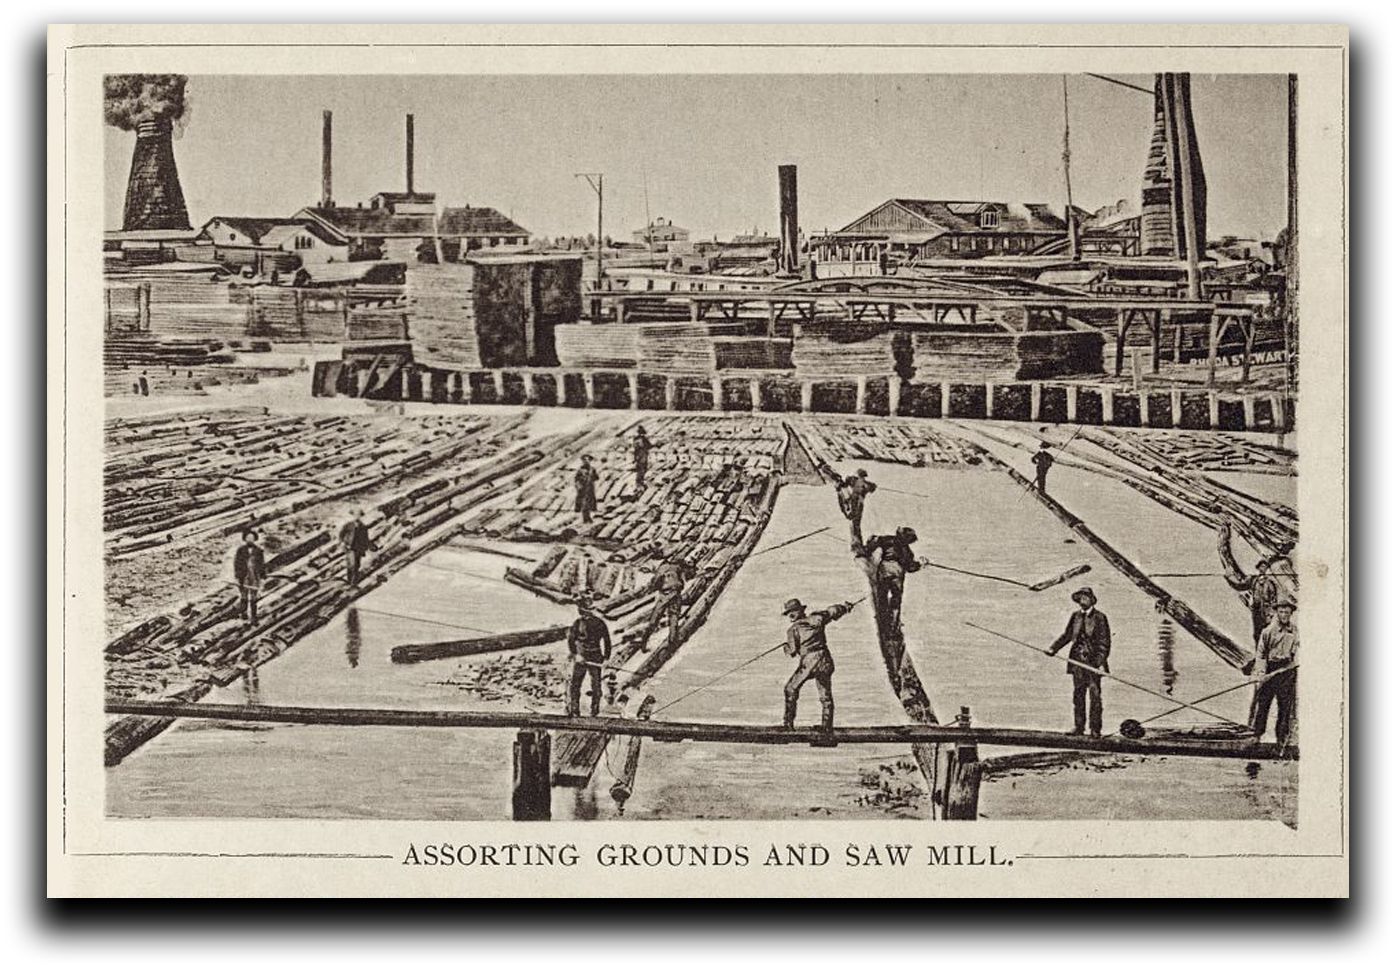 Assorting Grounds and Saw Mill